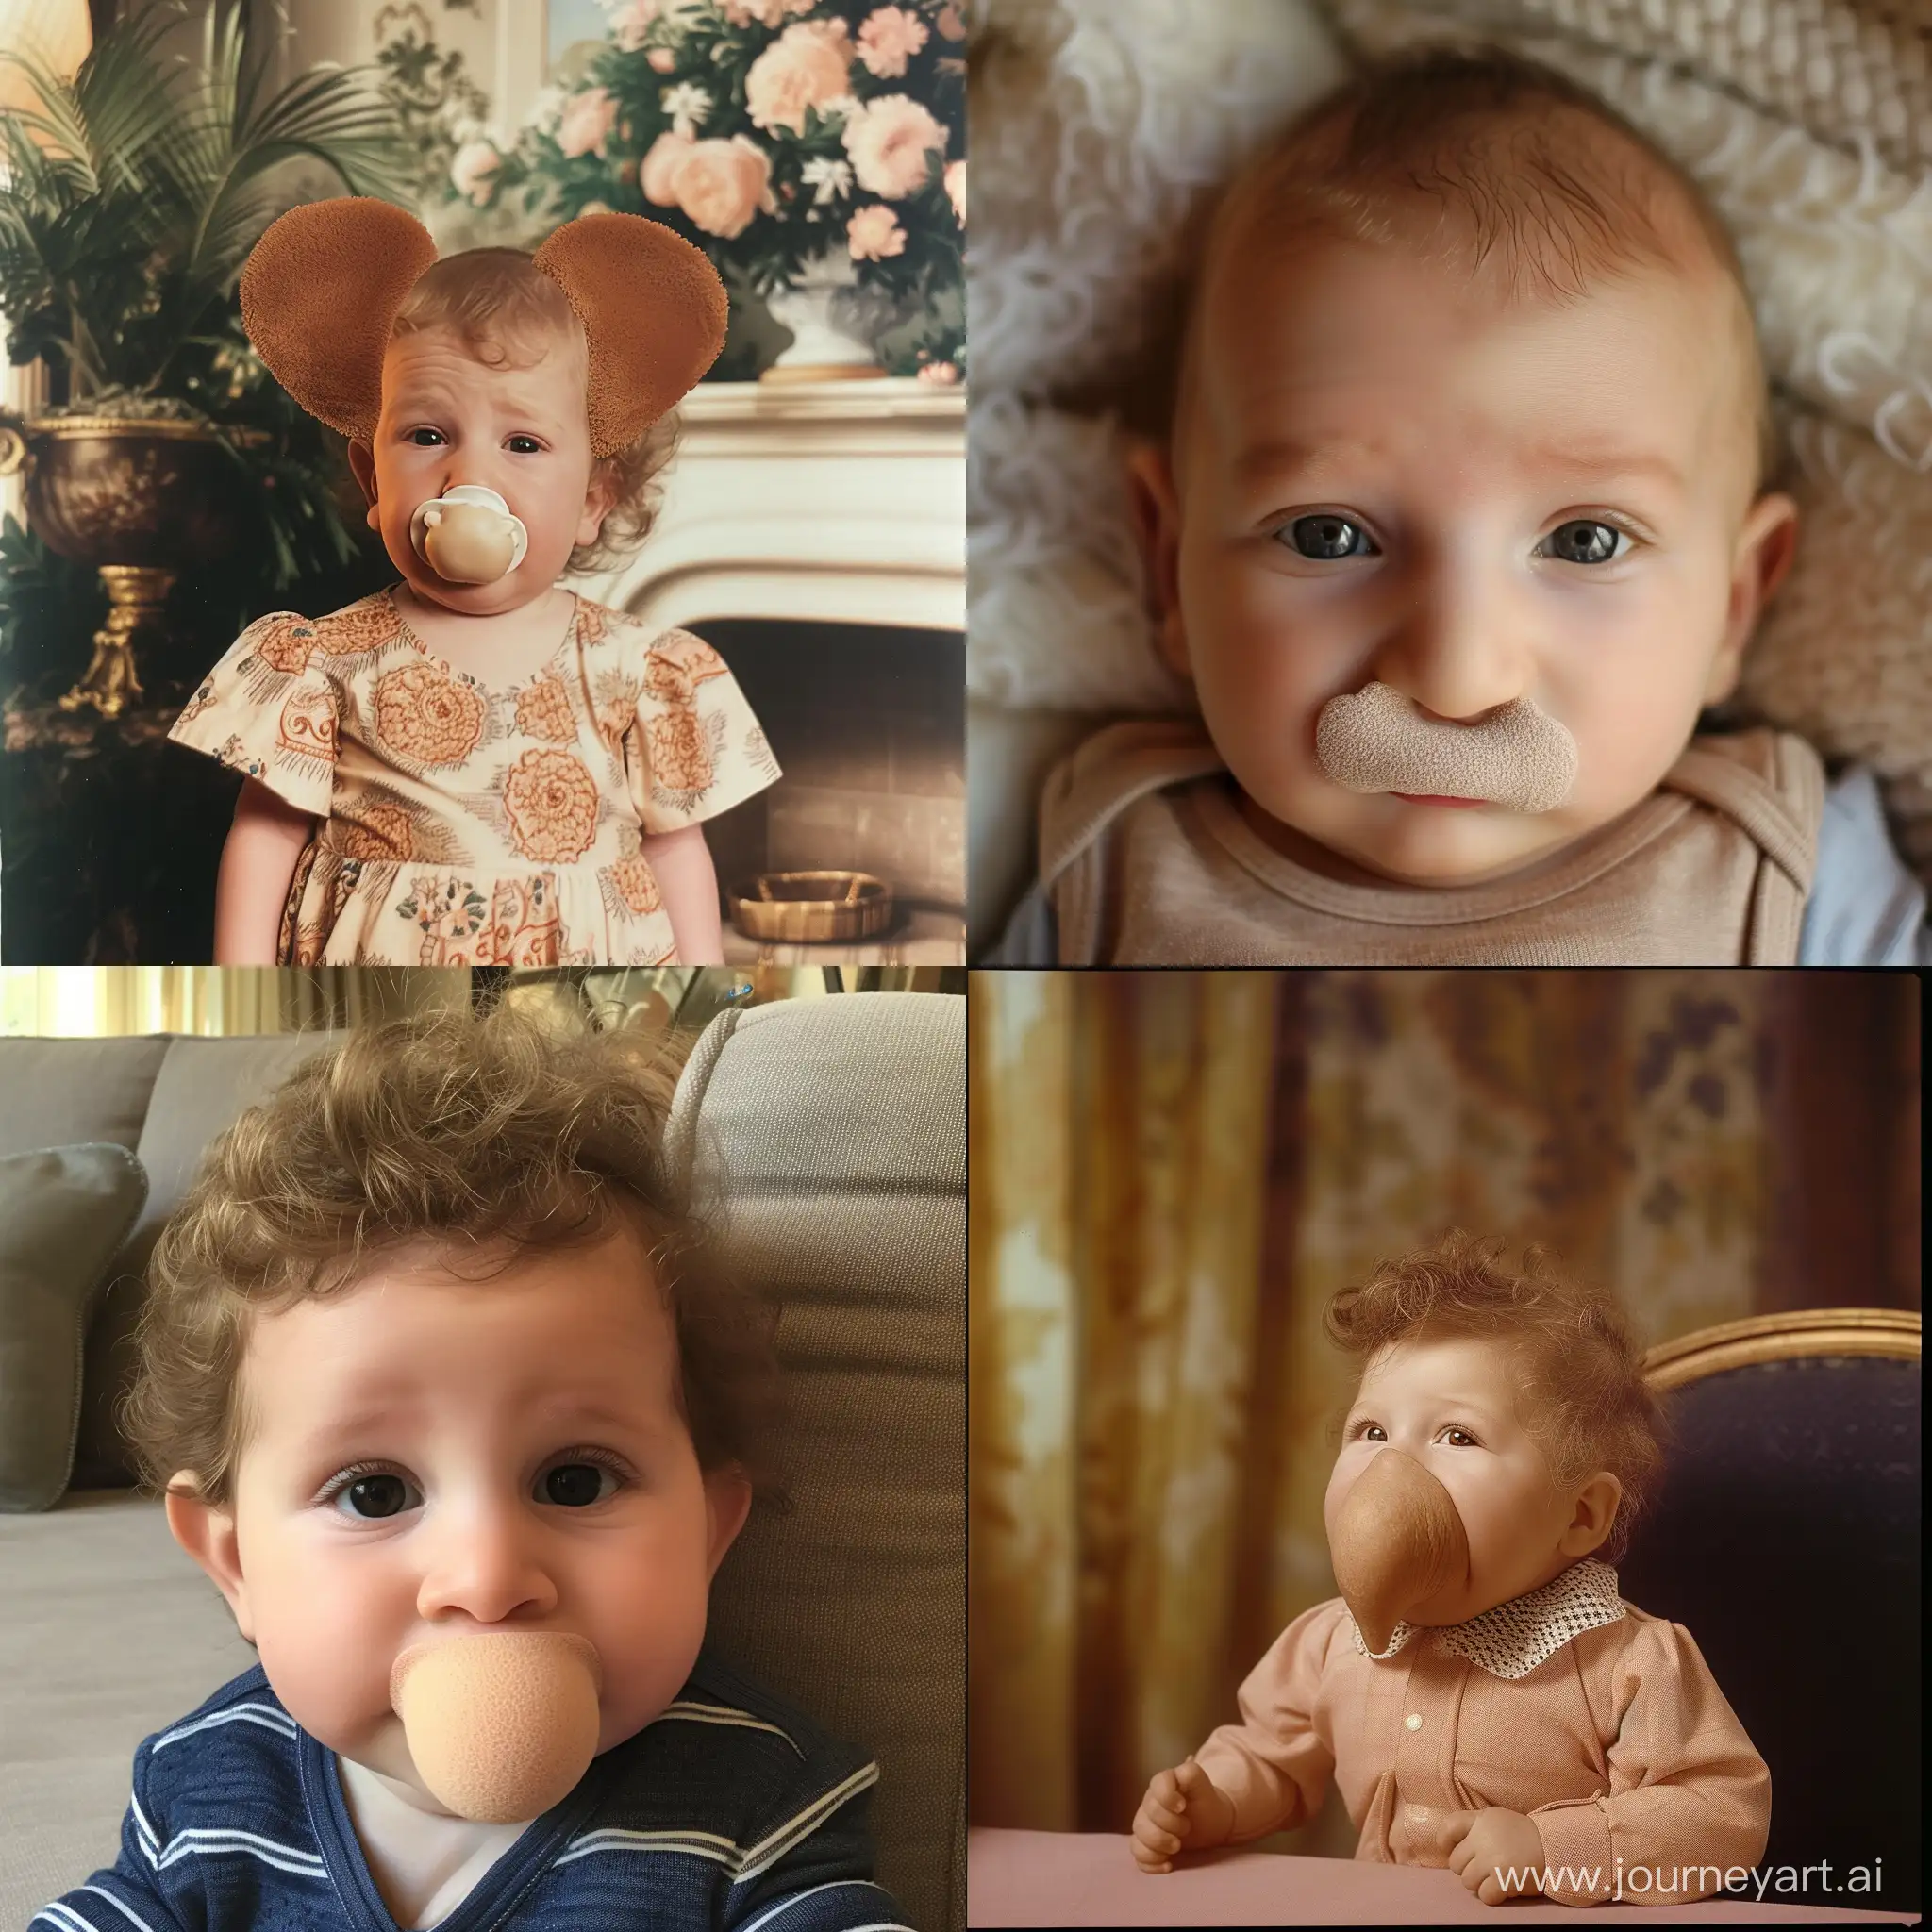 Barbra Streisand baby  with a huge oversised nose